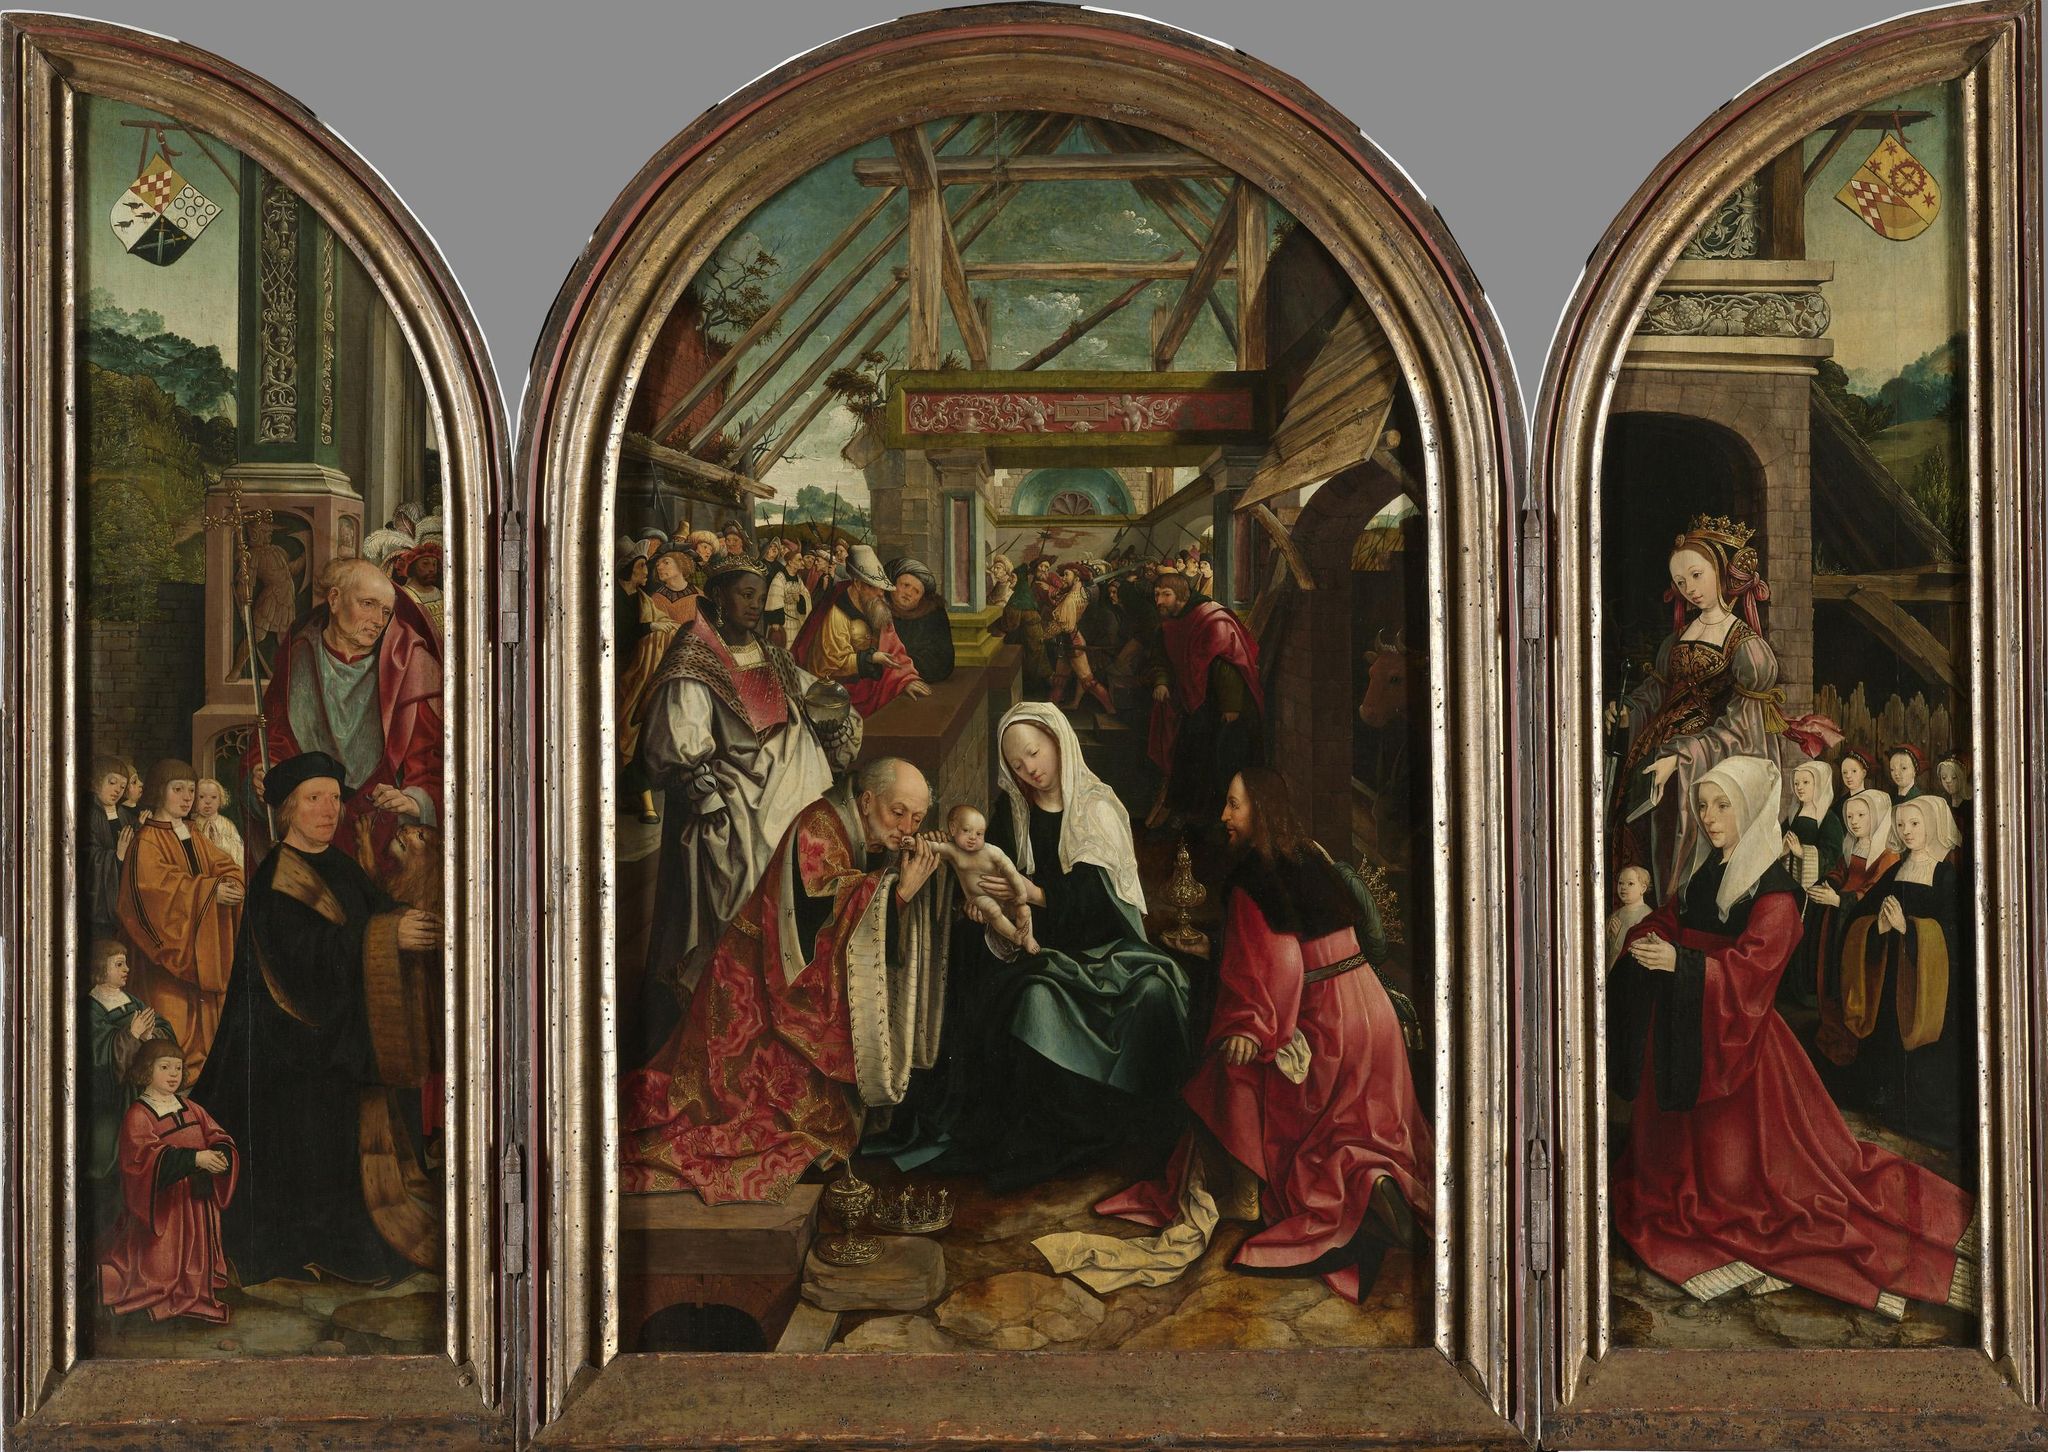 Triptych with the Adoration of the Magi (centre panel), the Donor and his Six Sons with St Jerome (inner left wing), the Donor’s Wife and her Seven Daughters with St Catherine of Alexandria (inner right wing), St Christopher (outer left wing) and St Antony Abbot (outer right wing)